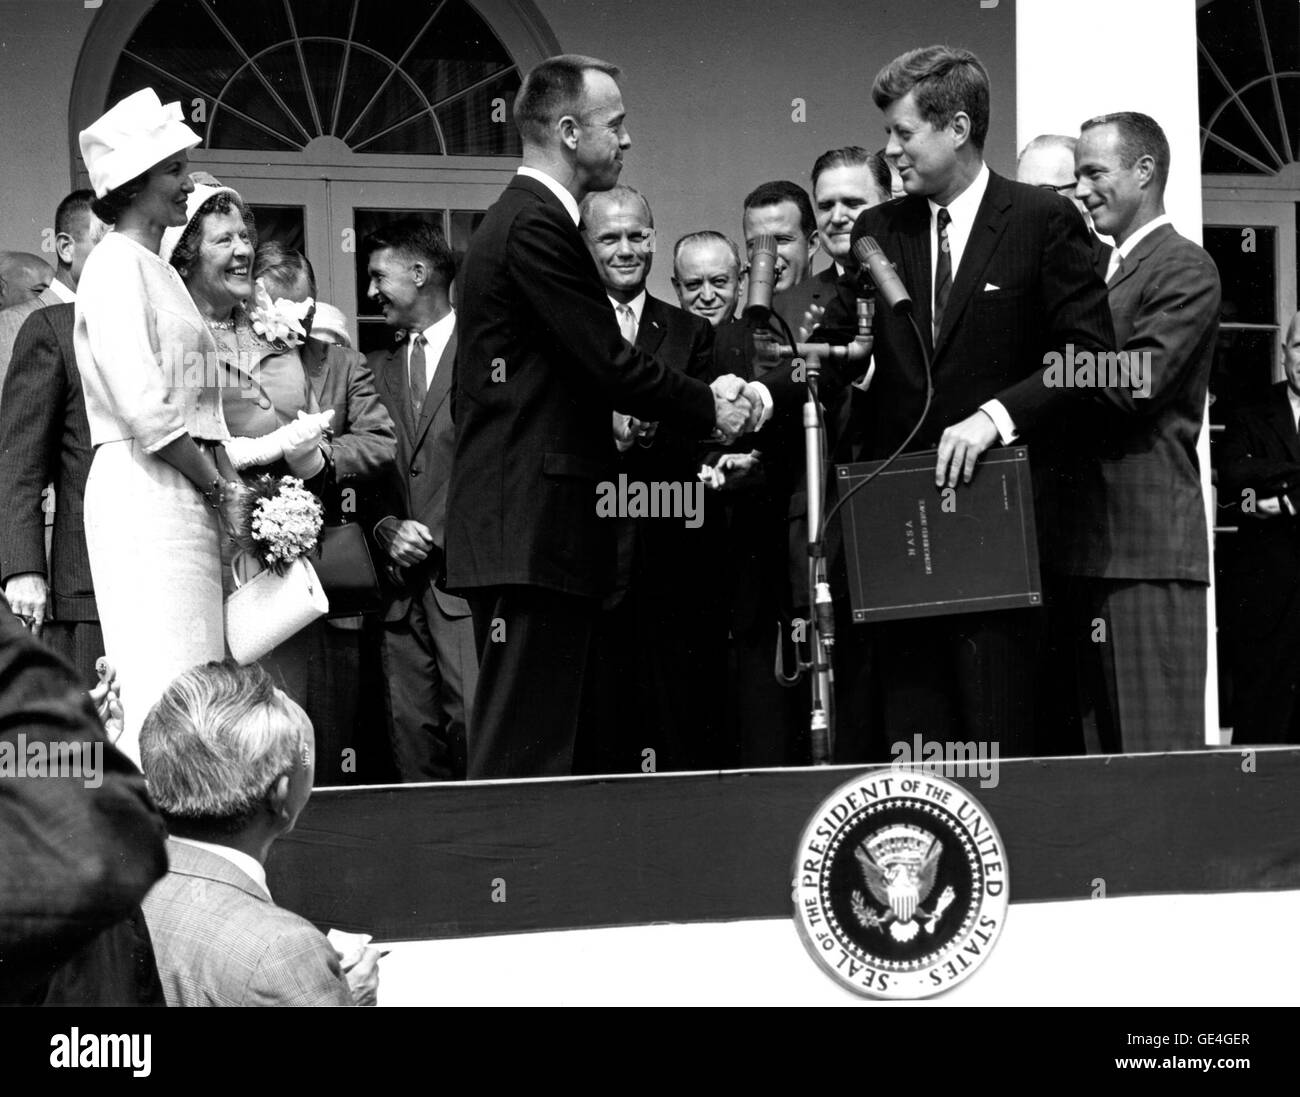 President John F. Kennedy congratulates astronaut Alan B. Shepard, Jr., the first American in space, on his historic May 5th, 1961 ride in the Freedom 7 spacecraft and presents him with the NASA Distinguished Service Medal. The ceremony took place on the White House lawn. Shepard's wife, Louise (left in white dress and hat), and his mother were in attendance as well as the other six Mercury astronauts and NASA officials, some visible in the background.                                                              Image # : 1961ADM-13 Date: May 8, 1961 Stock Photo